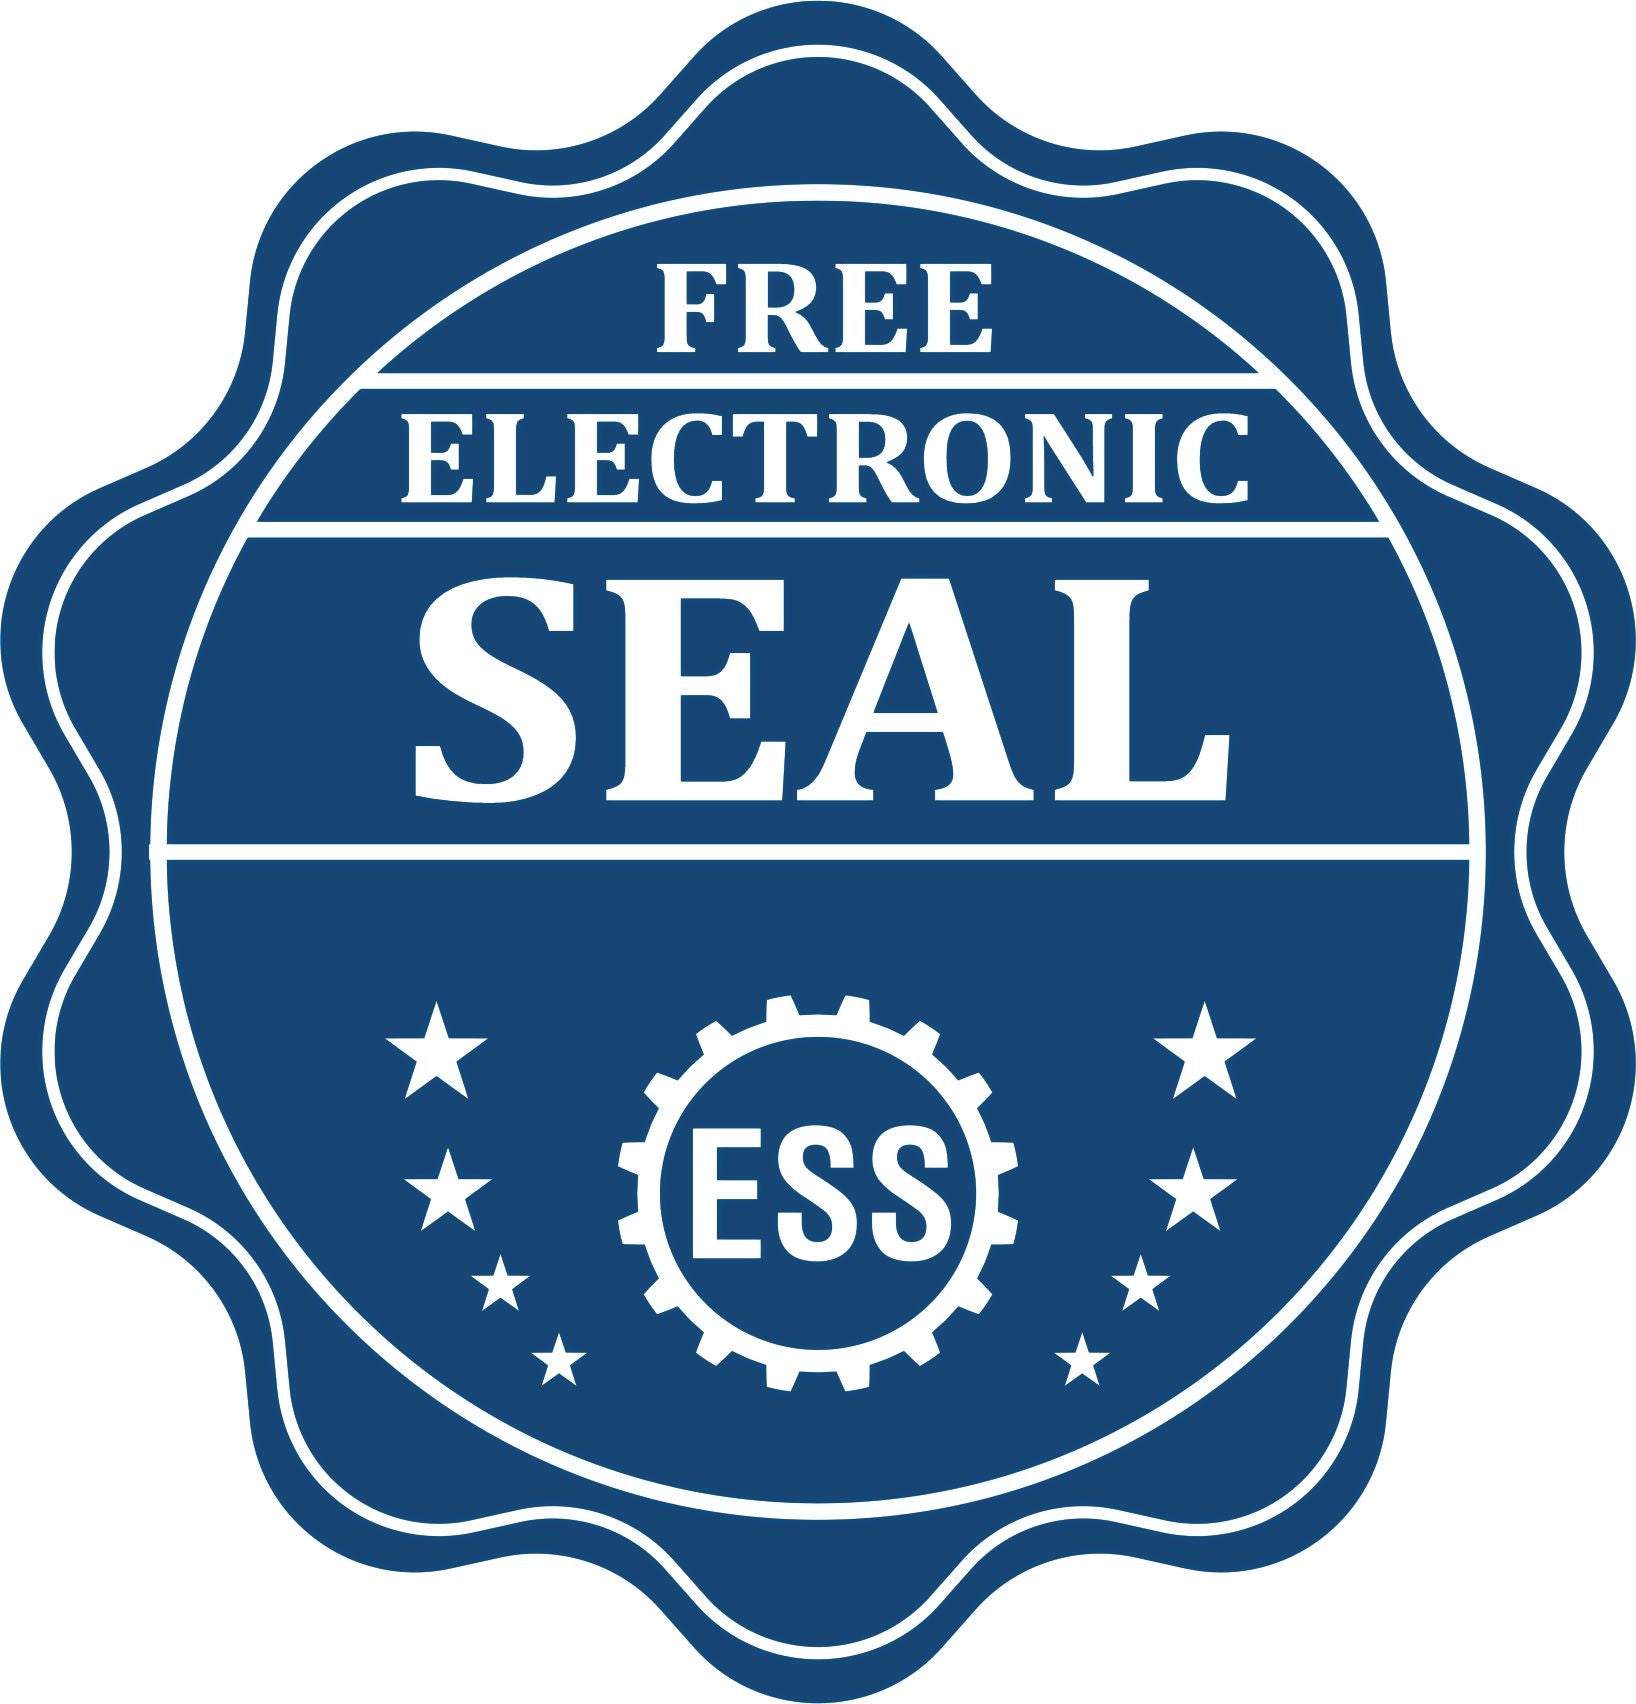 A badge showing a free electronic seal for the Handheld Hawaii Architect Seal Embosser with stars and the ESS gear on the emblem.